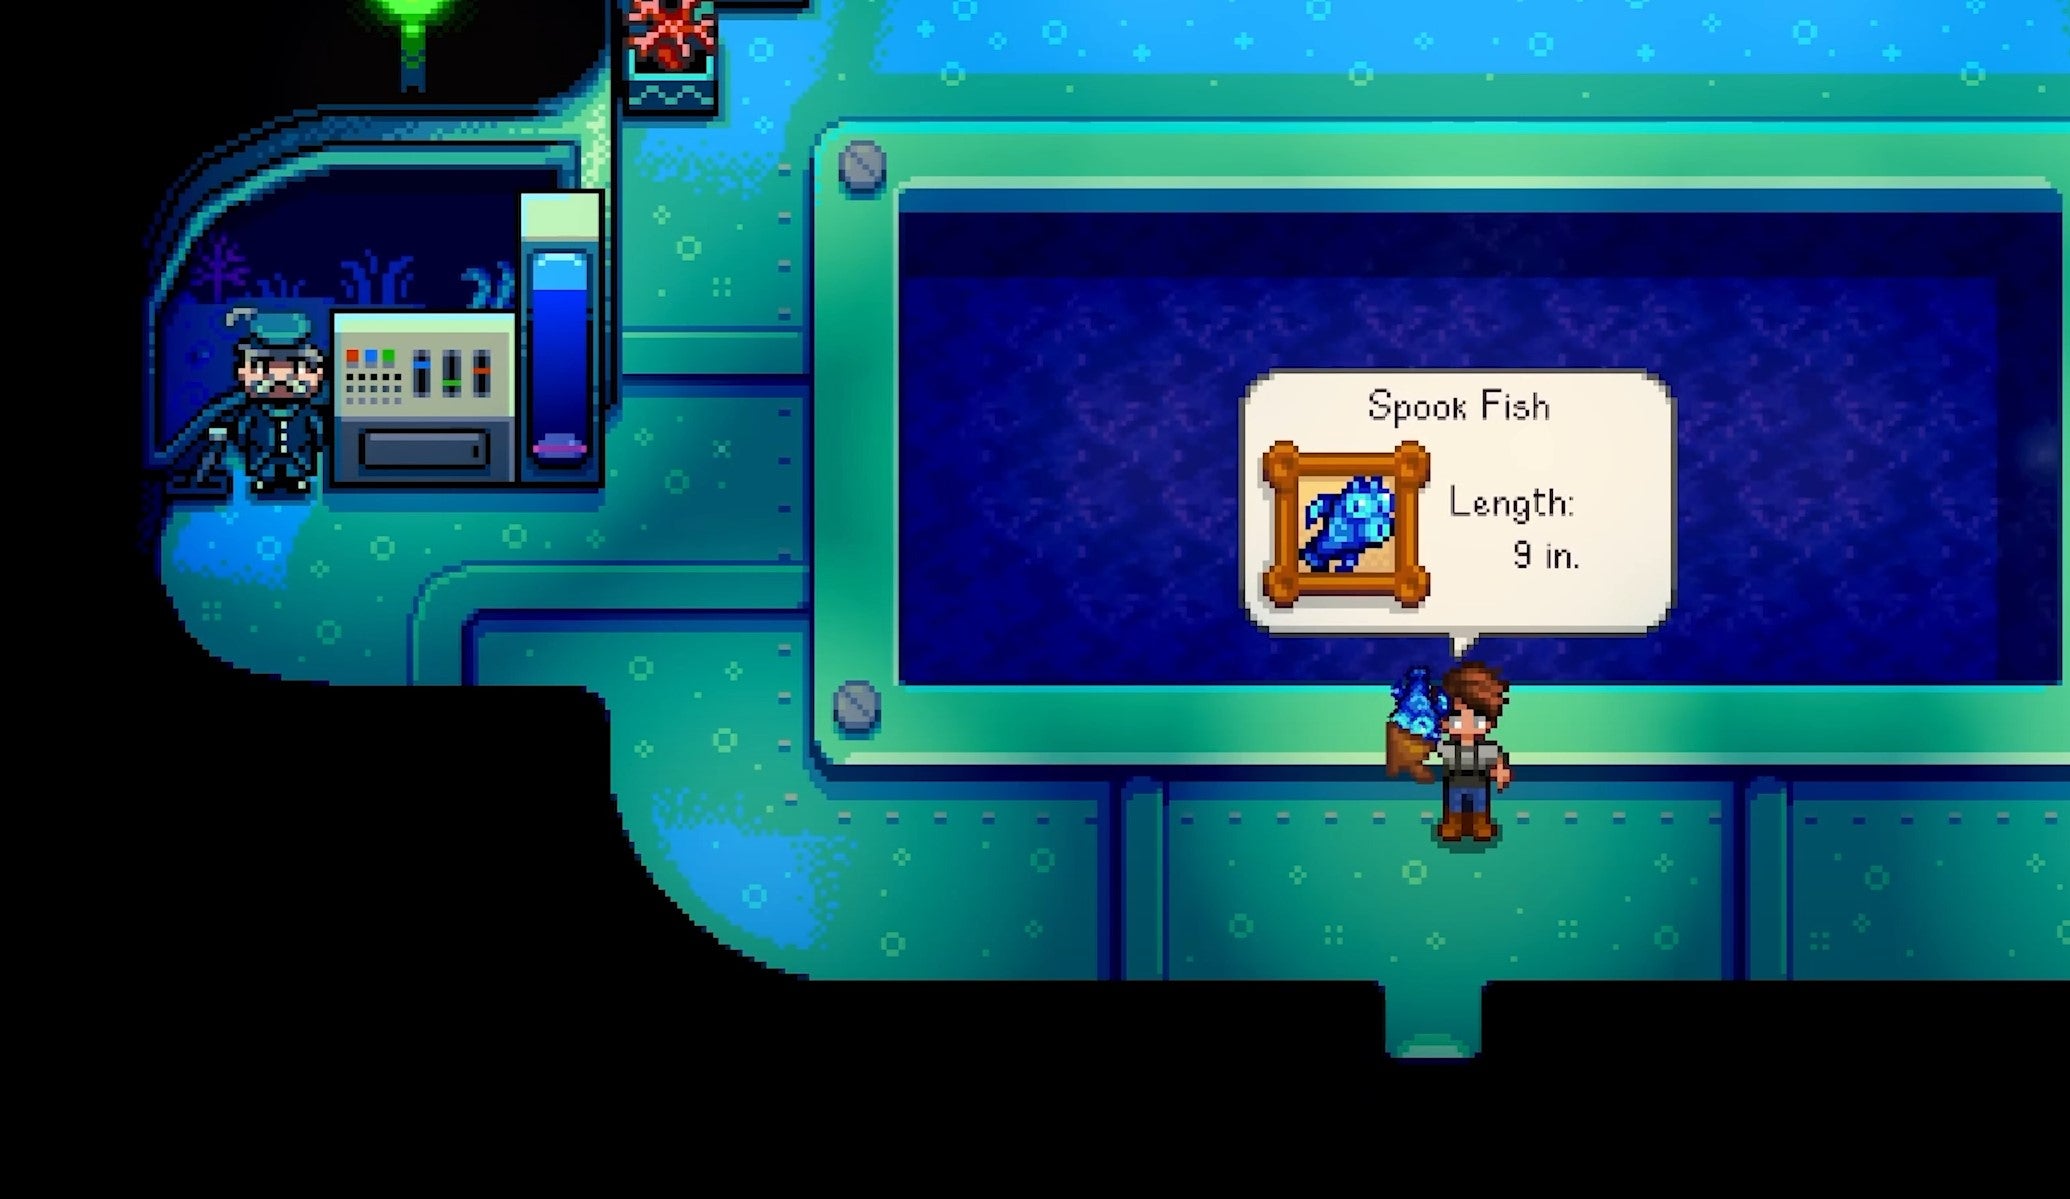 Catching fish on the submarine in Stardew Valley.